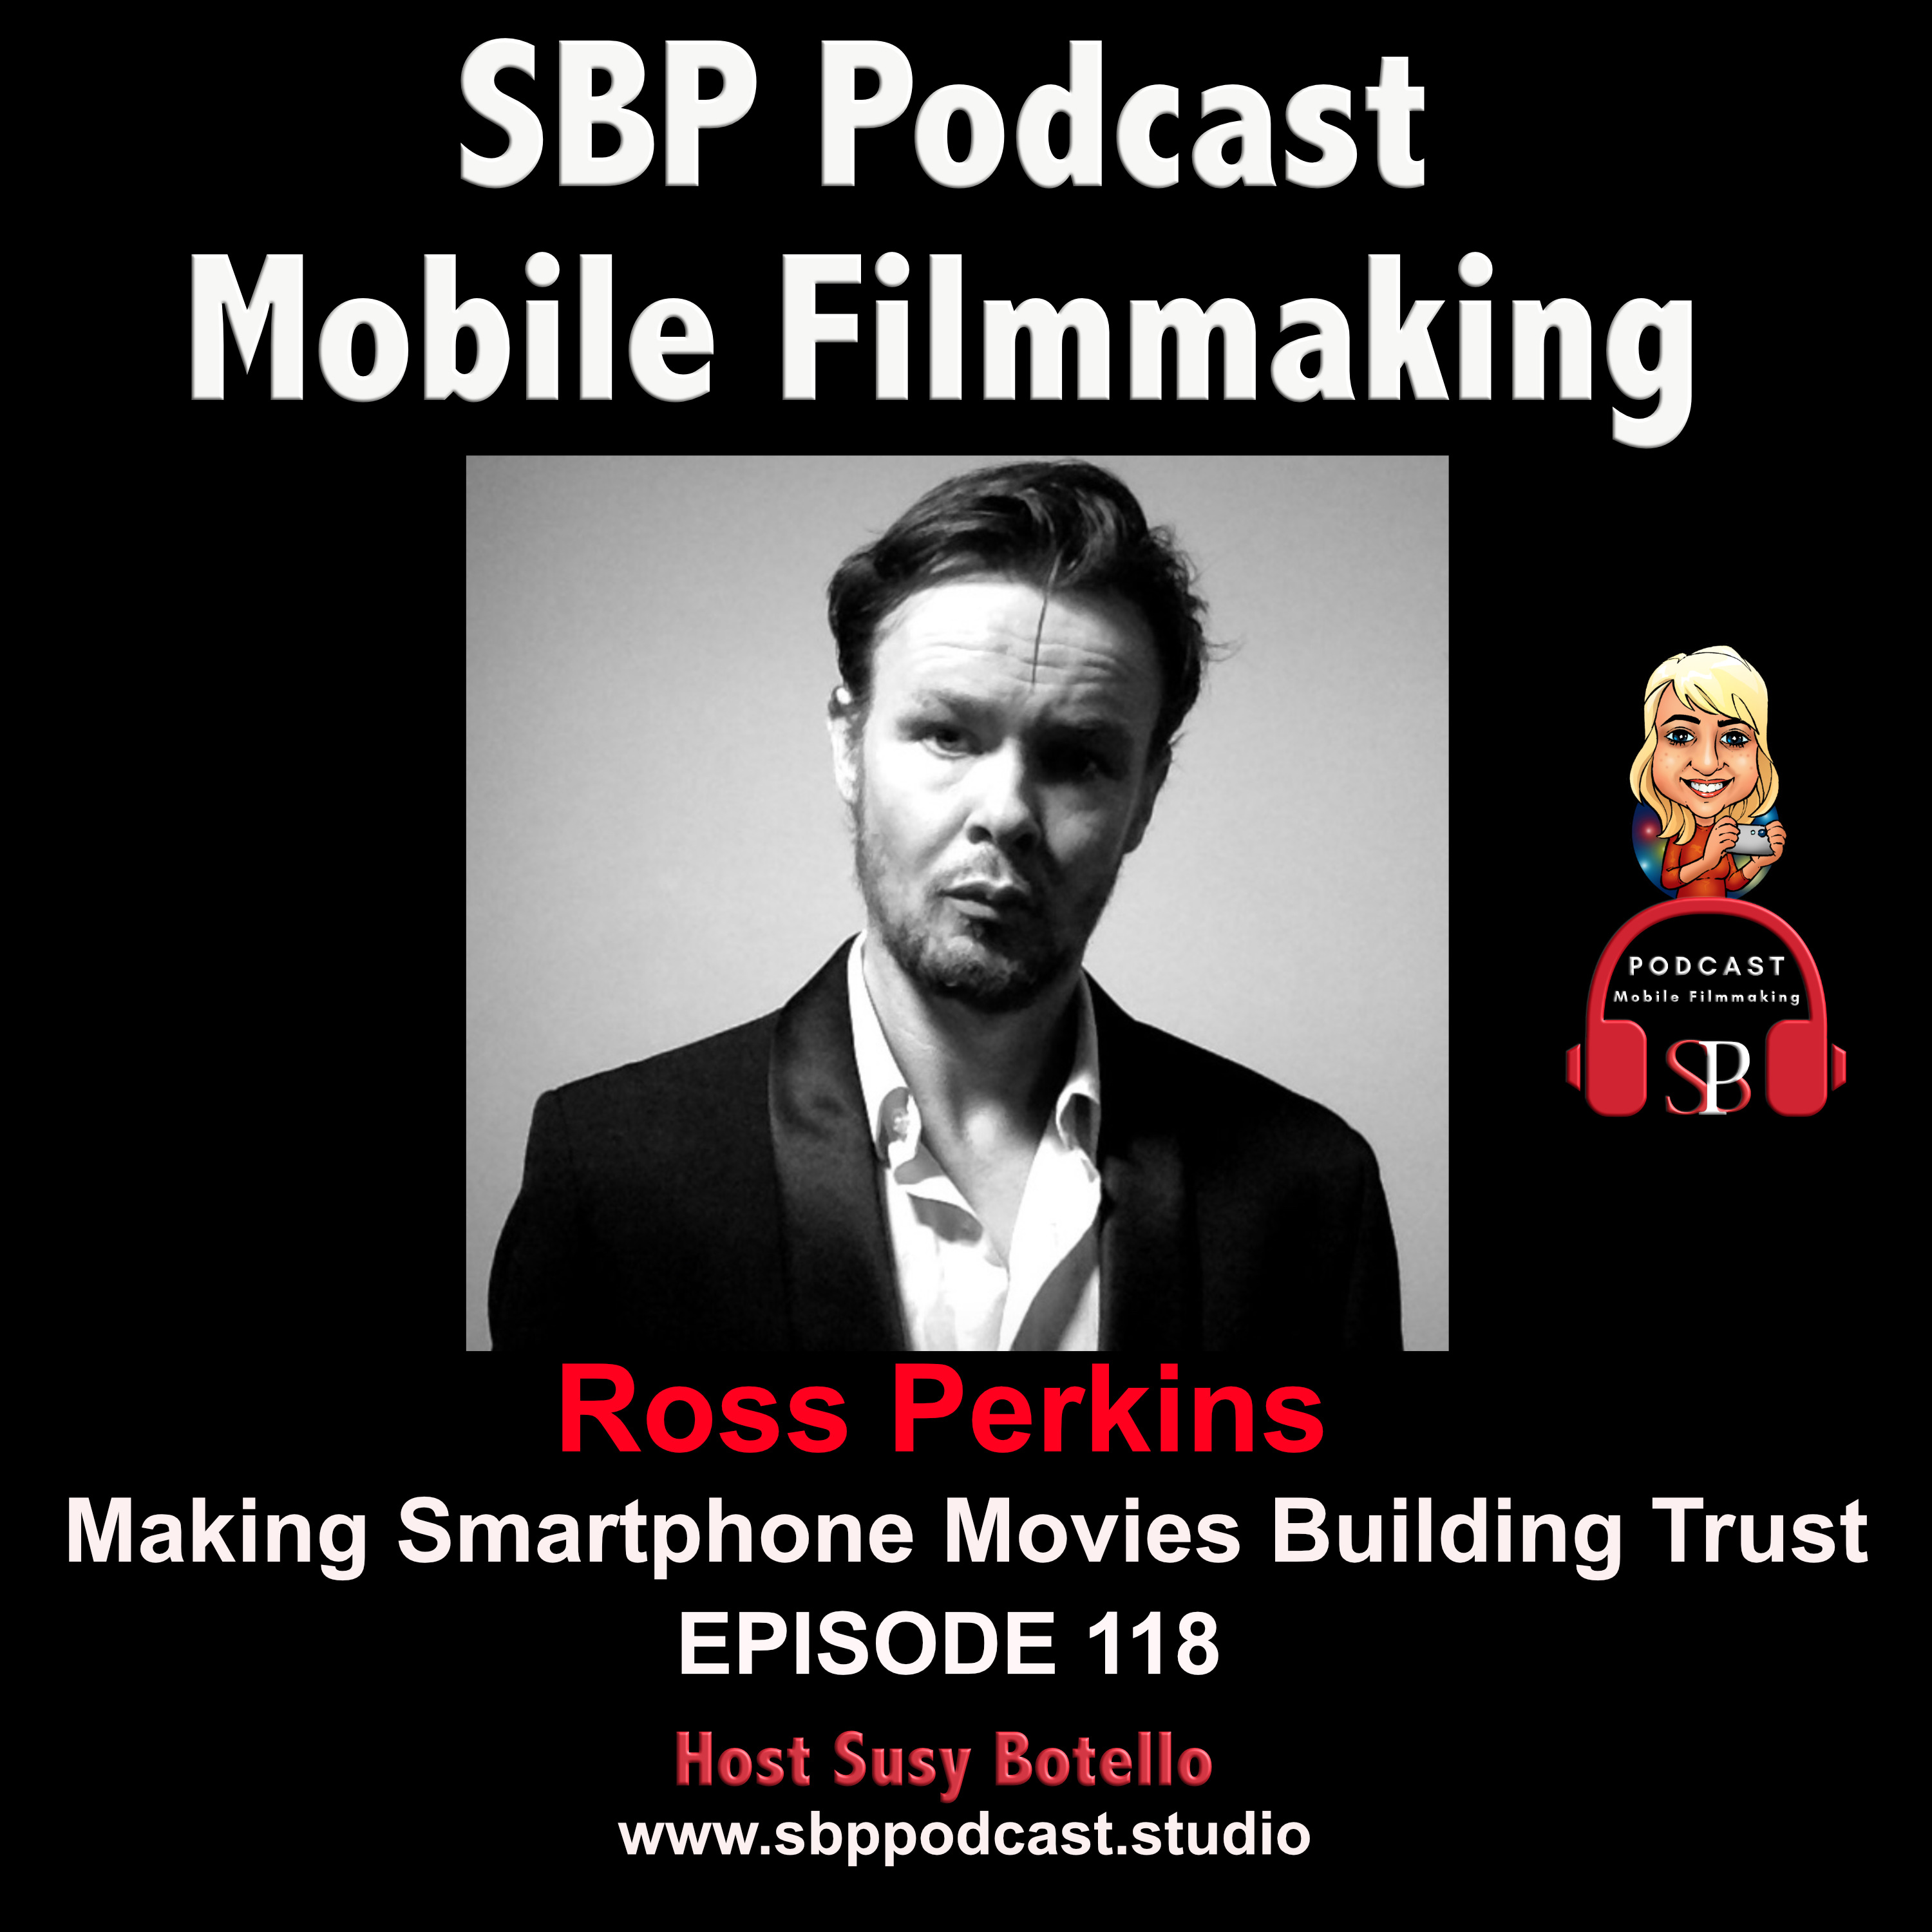 Making Smartphone Movies Building Trust with Ross Perkins